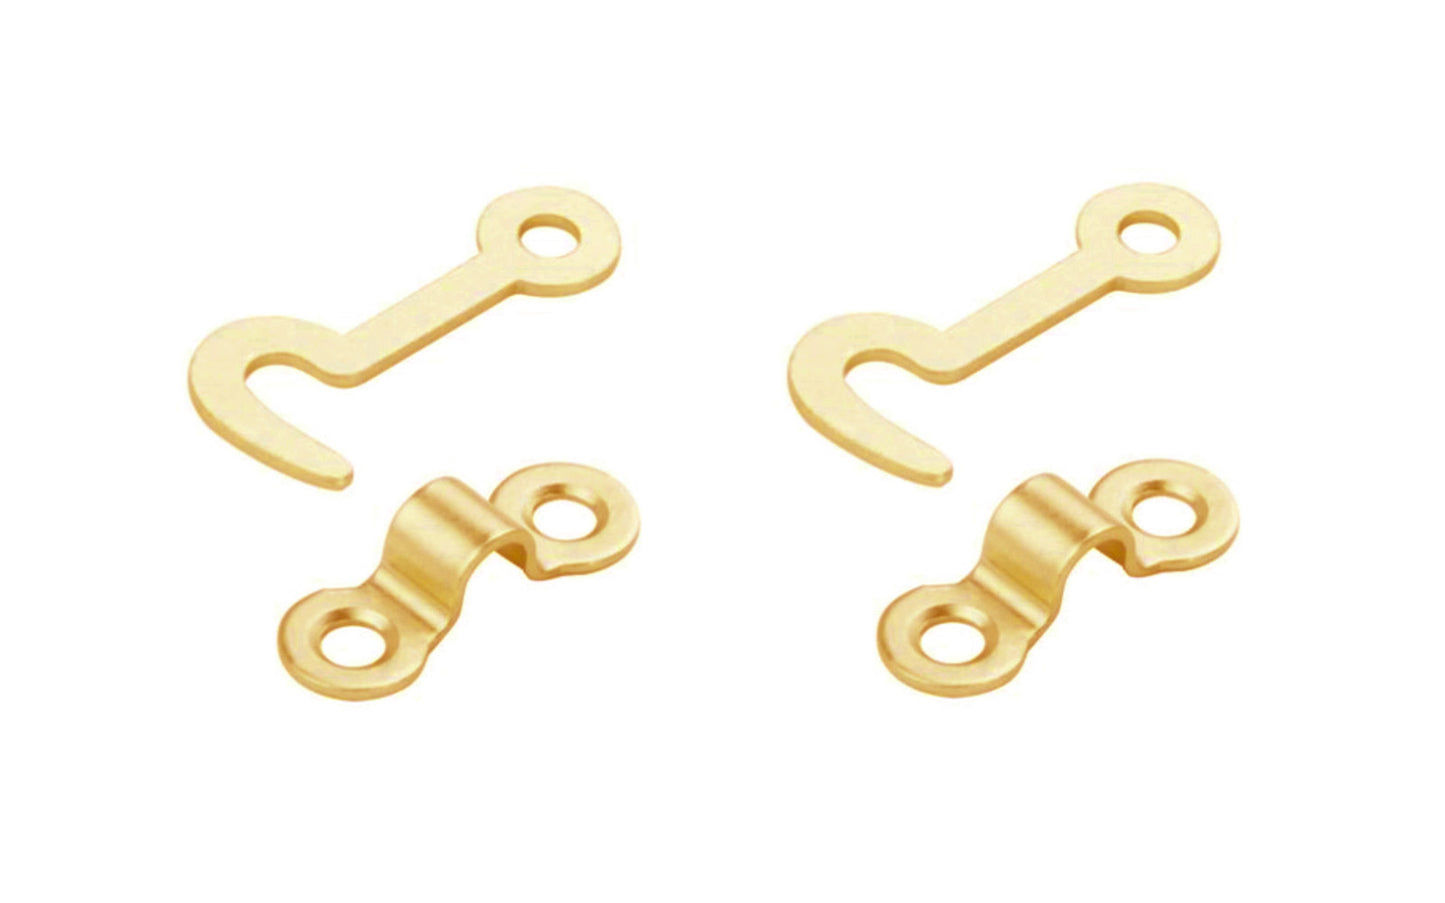 Small Hooks & Staples - 2 Pack. These small small hooks & staples are designed for small chests, jewelry boxes, craft projects, etc. Hook & loop design can be used for left or right hand applications. Sold as two hooks & staples in pack. Solid brass.